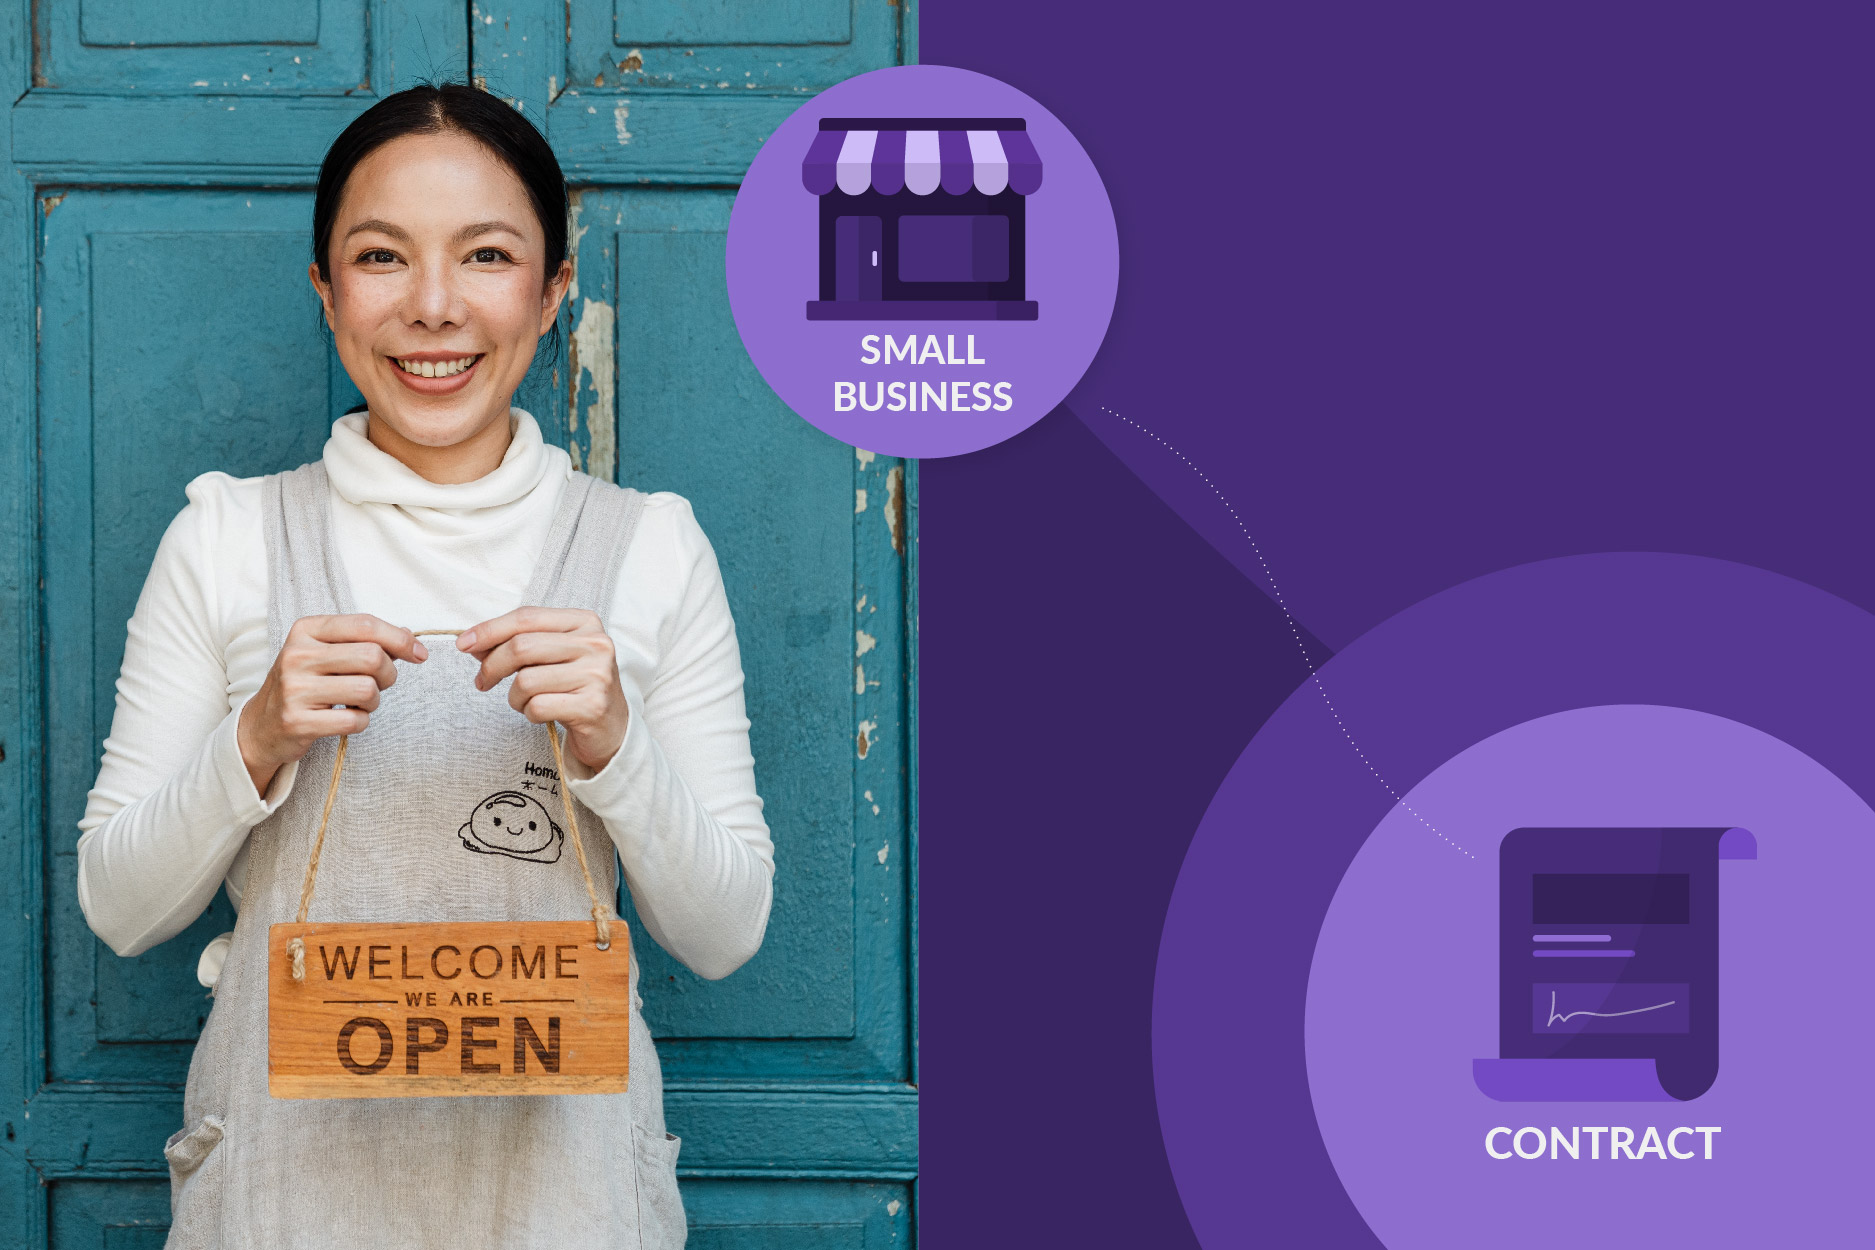 Female small business owner holding an "Open" sign in front of her door. Illustrations of a small business and a contact.